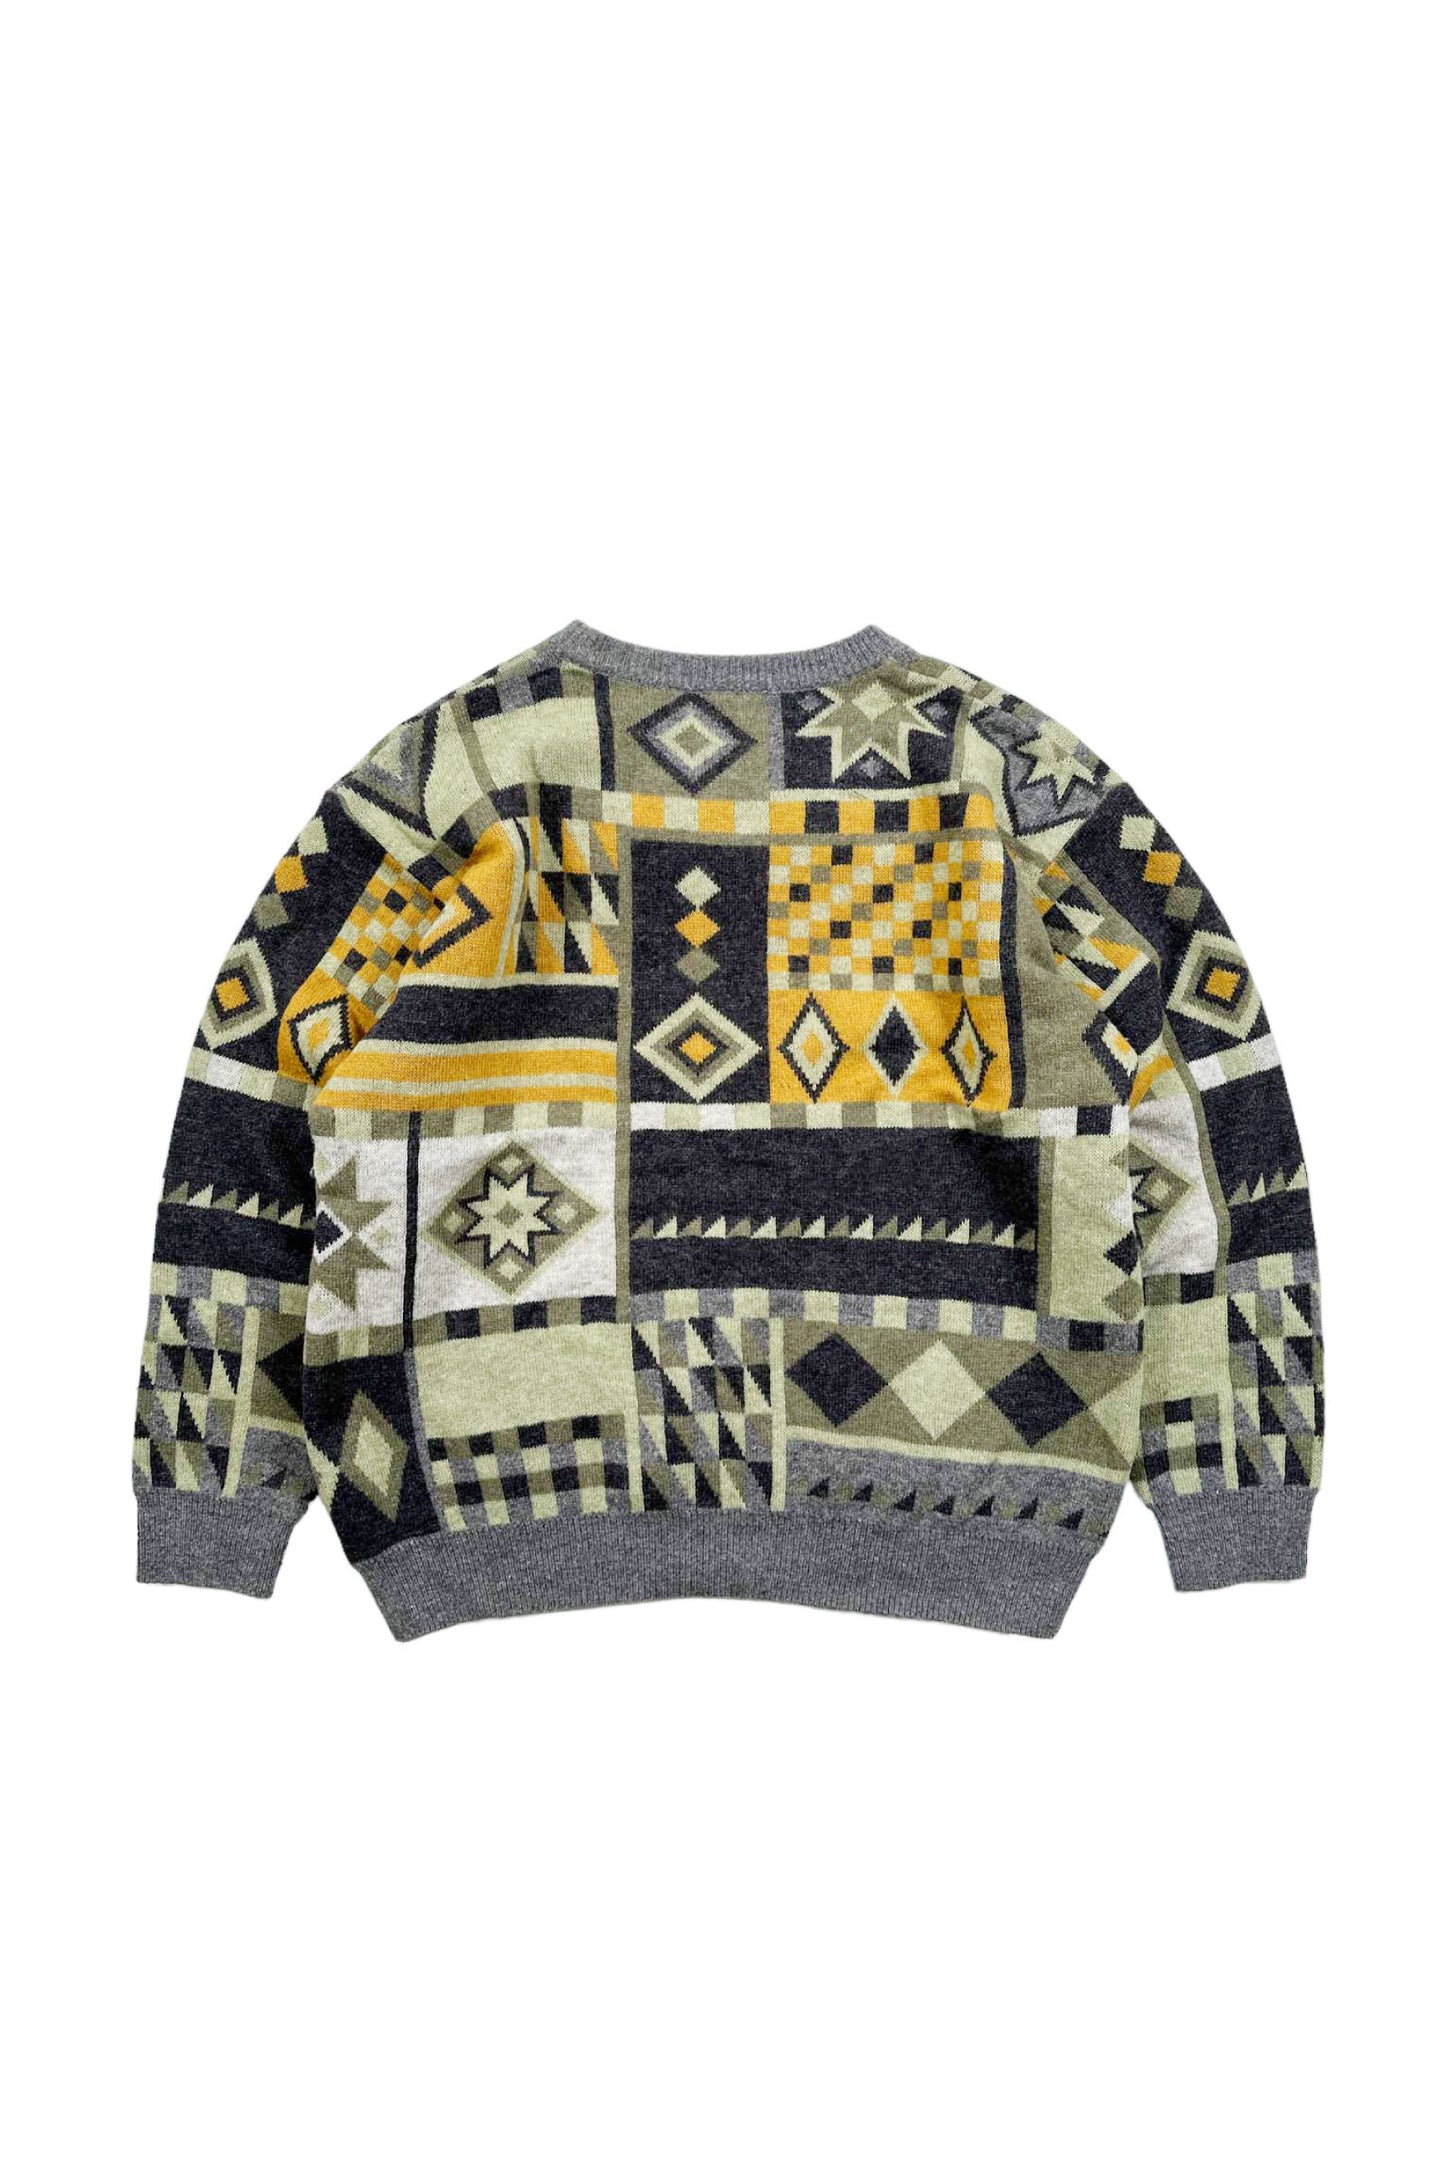 90's Made in ITALY pattern sweater